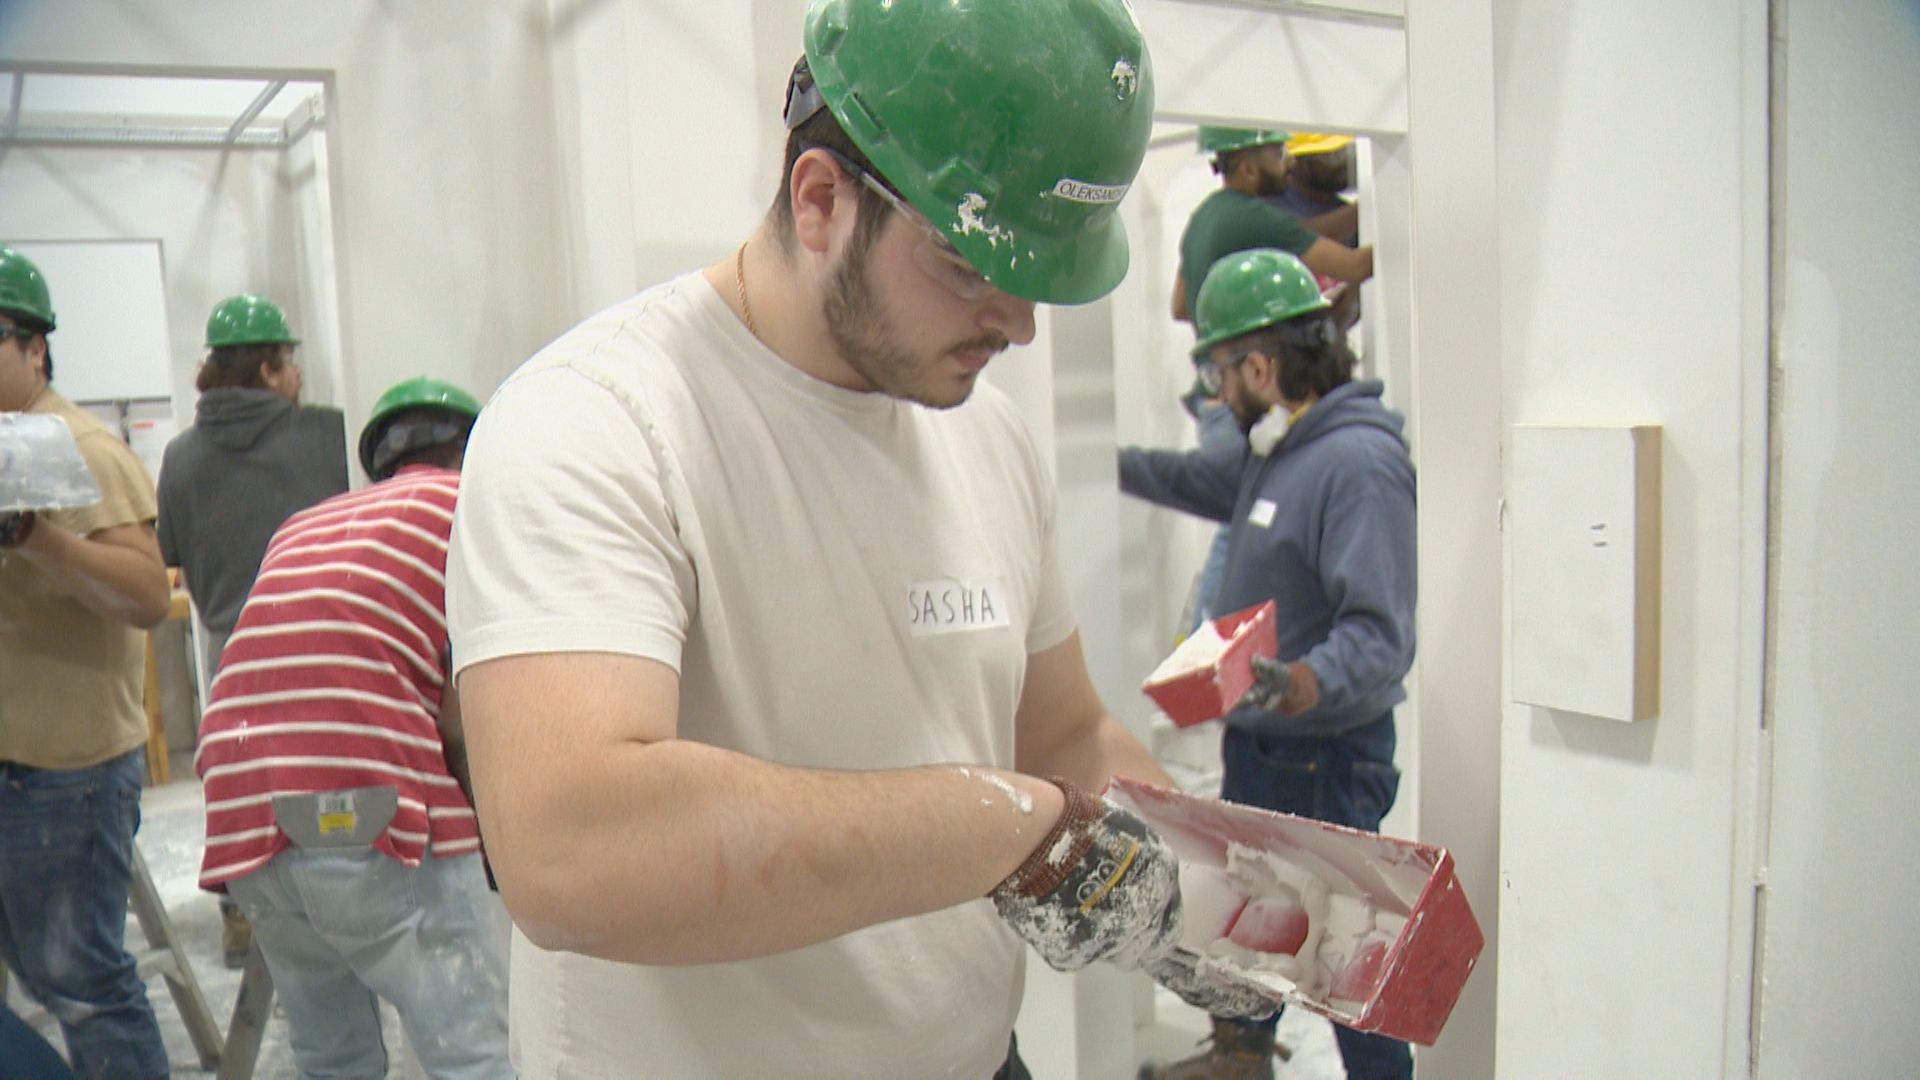 Saskatchewan employers on the hunt for more skilled trade workers